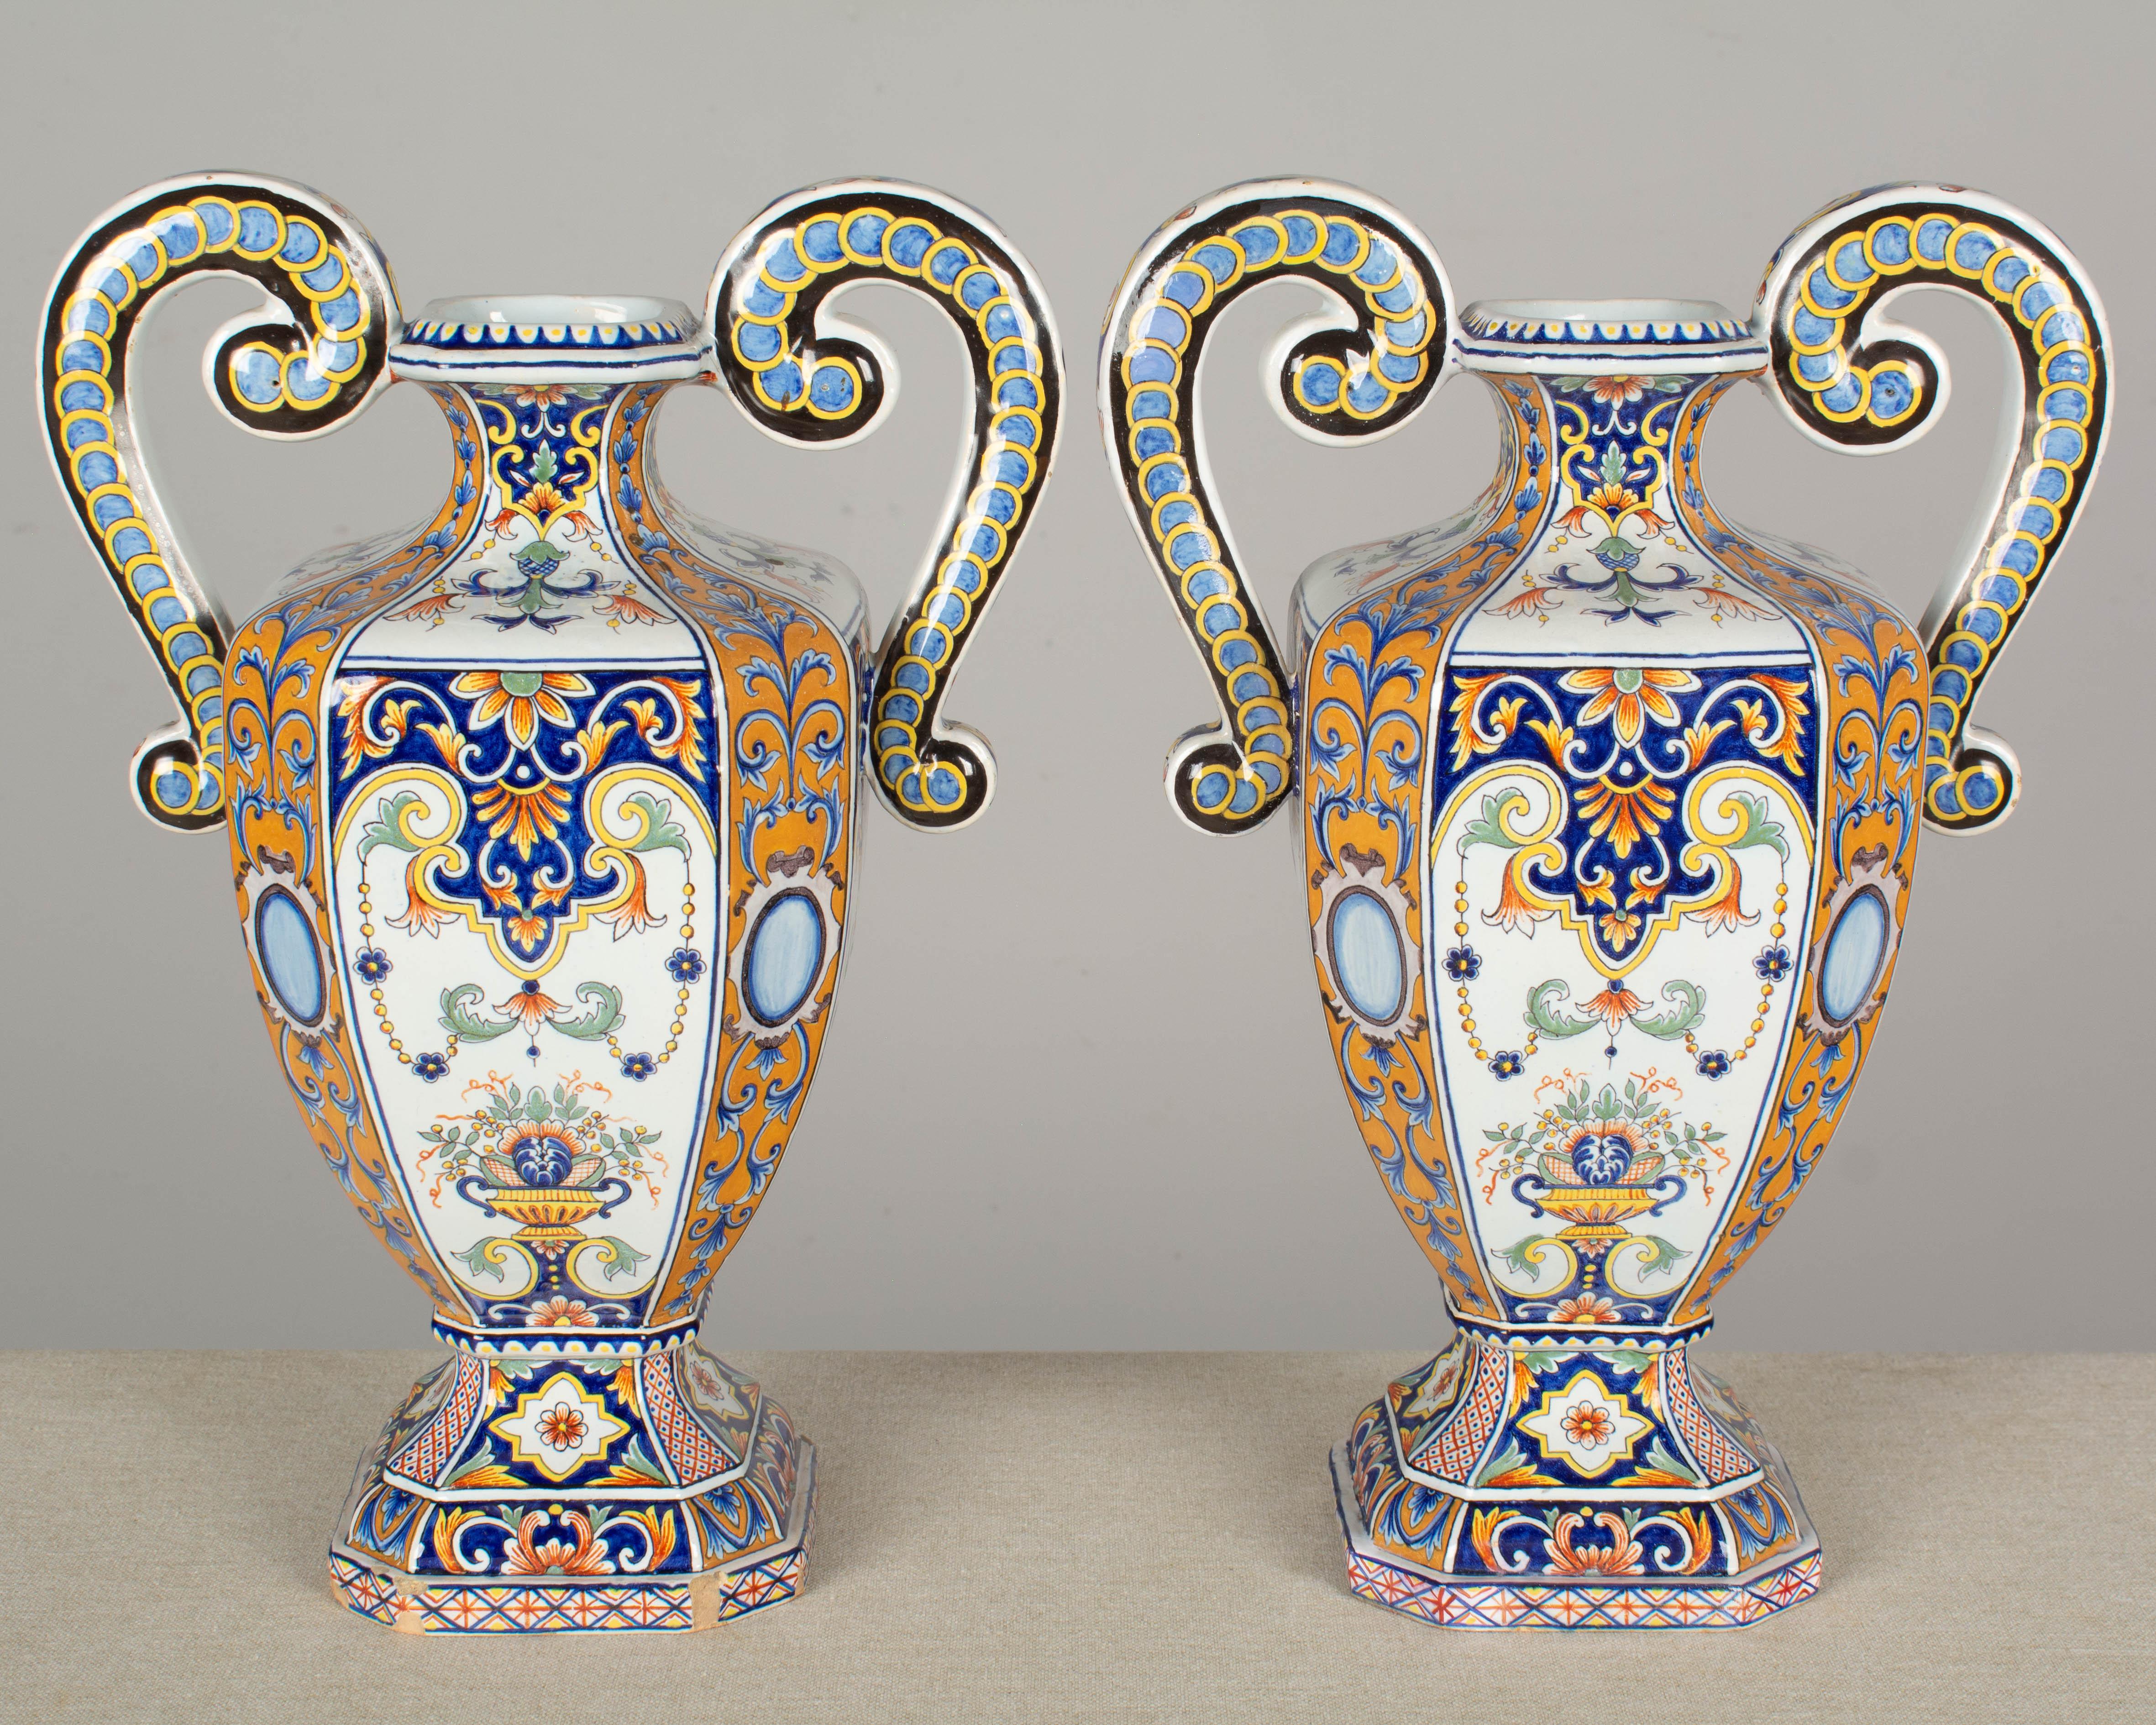 19th Century French Desvres Faience Urn Form Vases, a Pair For Sale 8